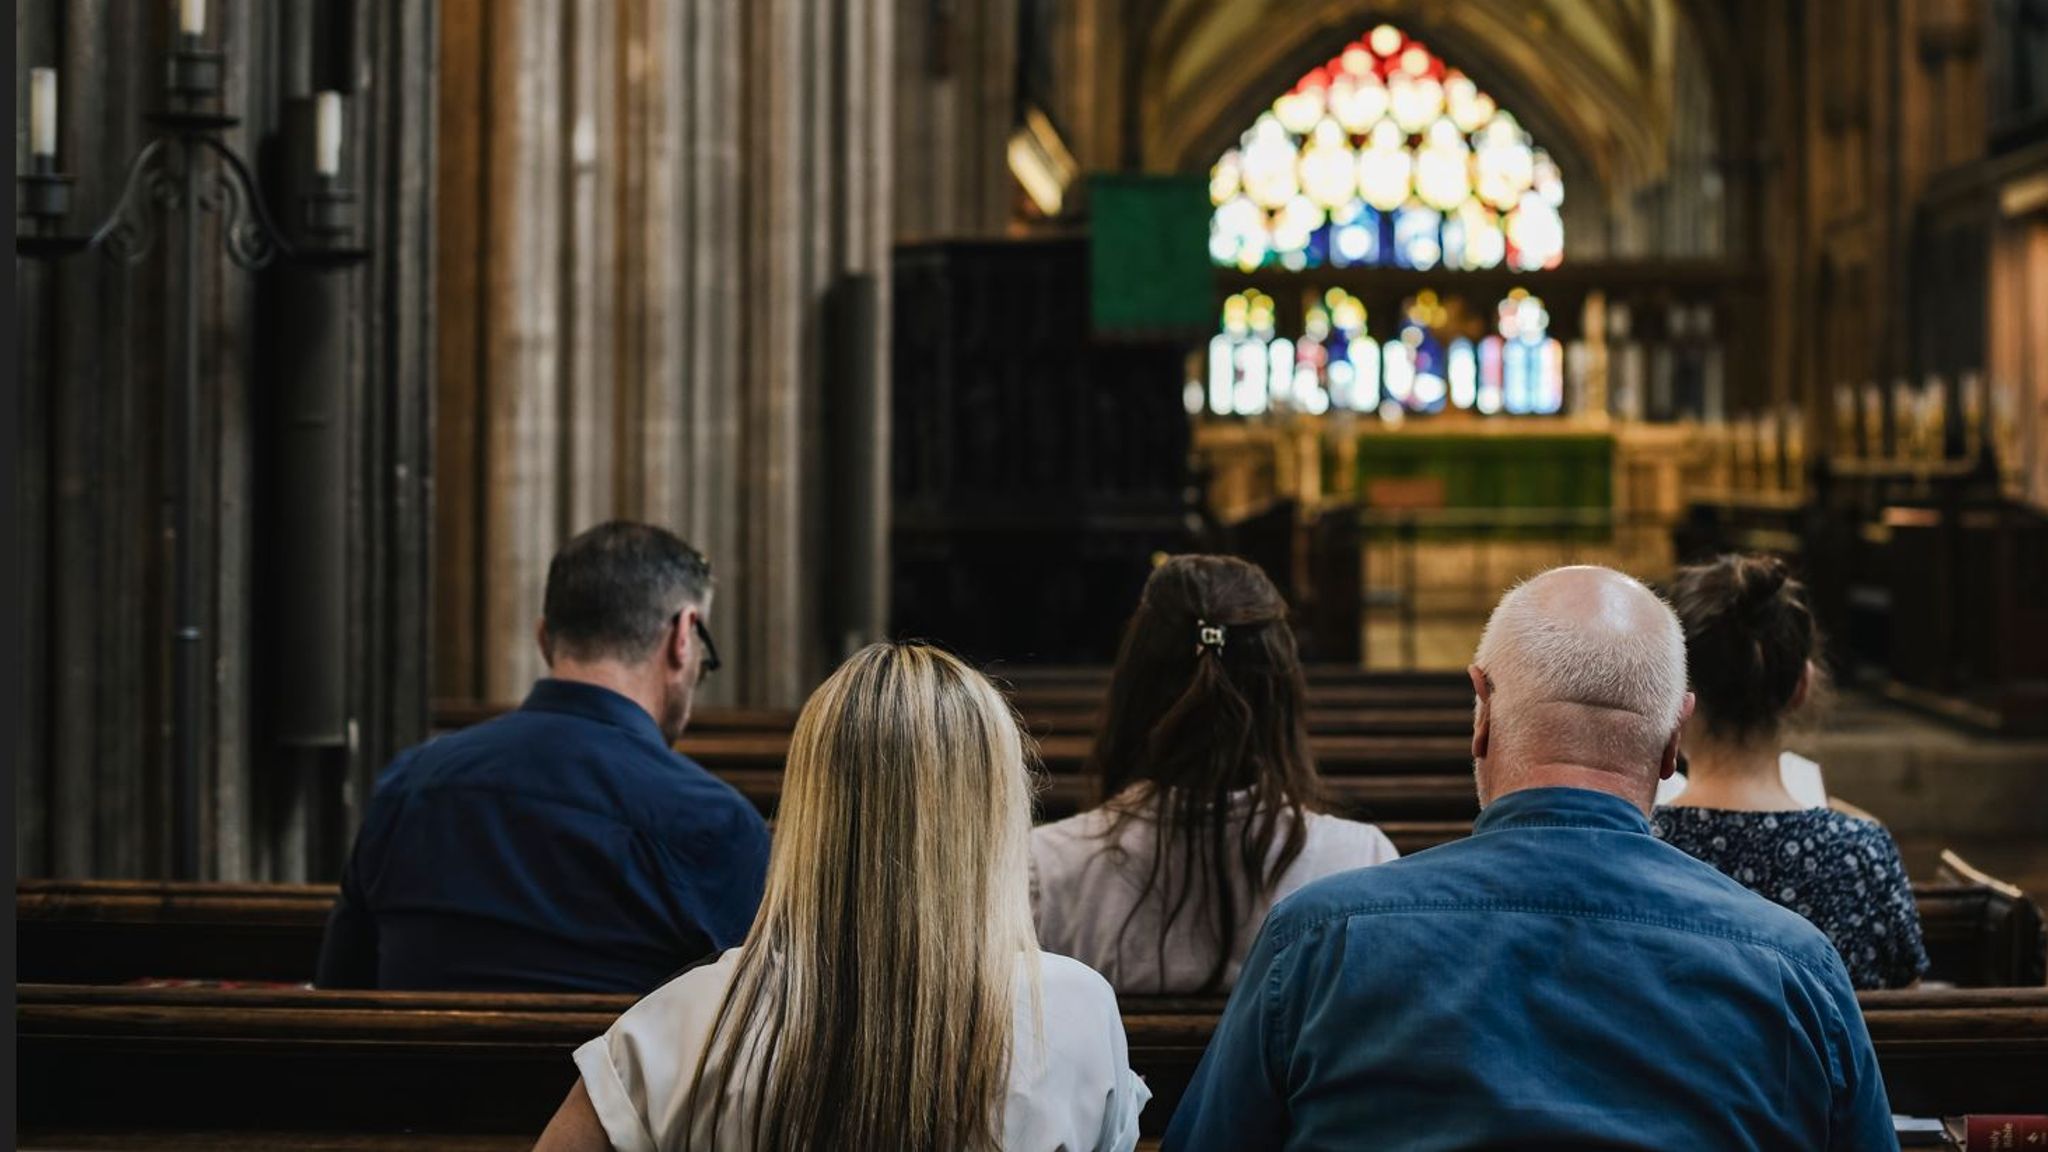 census 2021: data shows number of christians in england and wales falls below half for first time | uk news | sky news